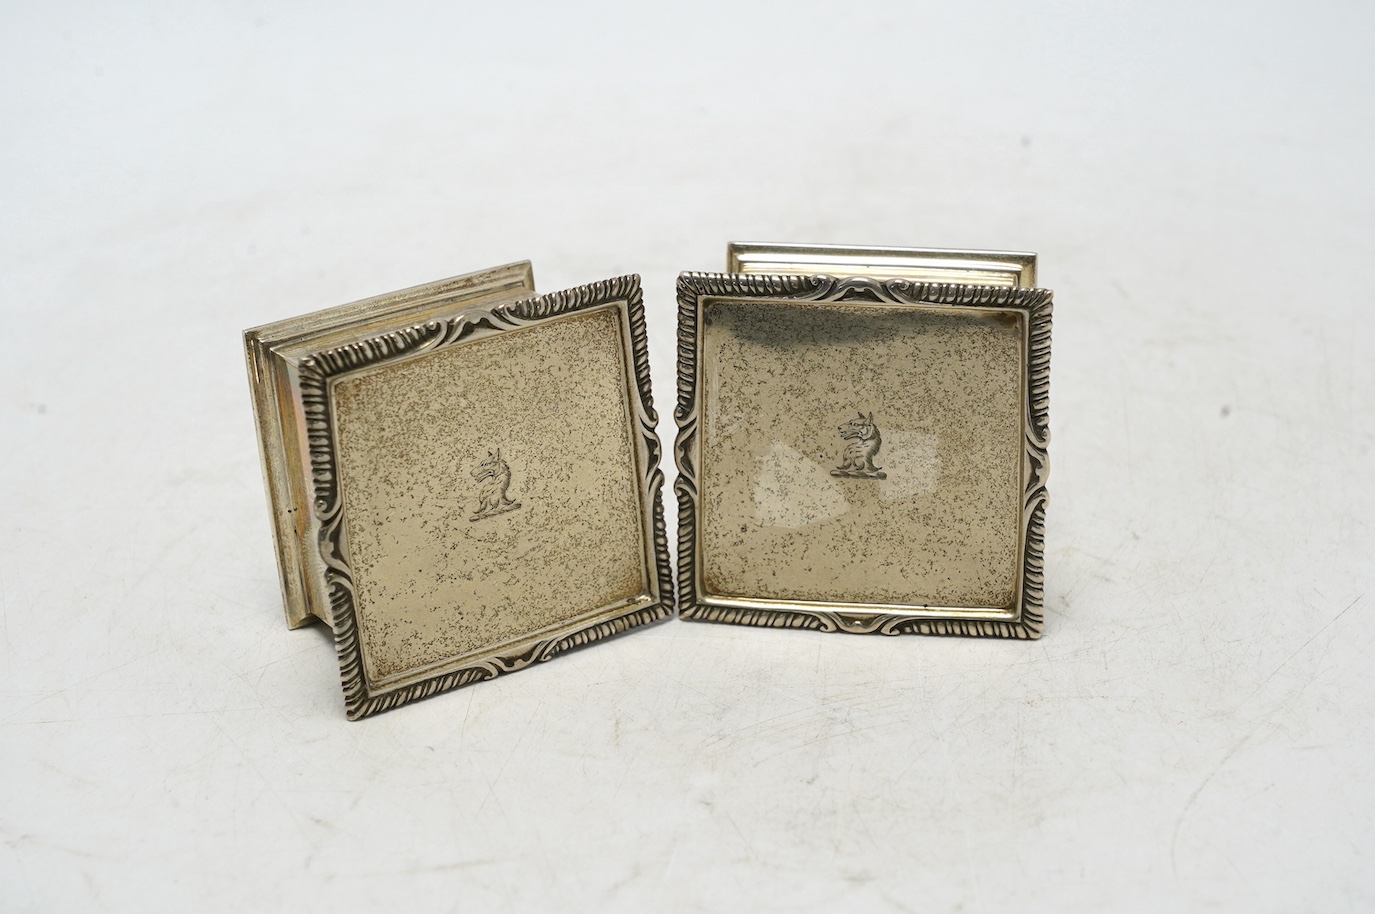 A pair of George V silver square boxes with hinged covers, by Goldsmiths & Silversmiths Co Ltd, London, 1914, 59mm, 7.2oz. Condition - good